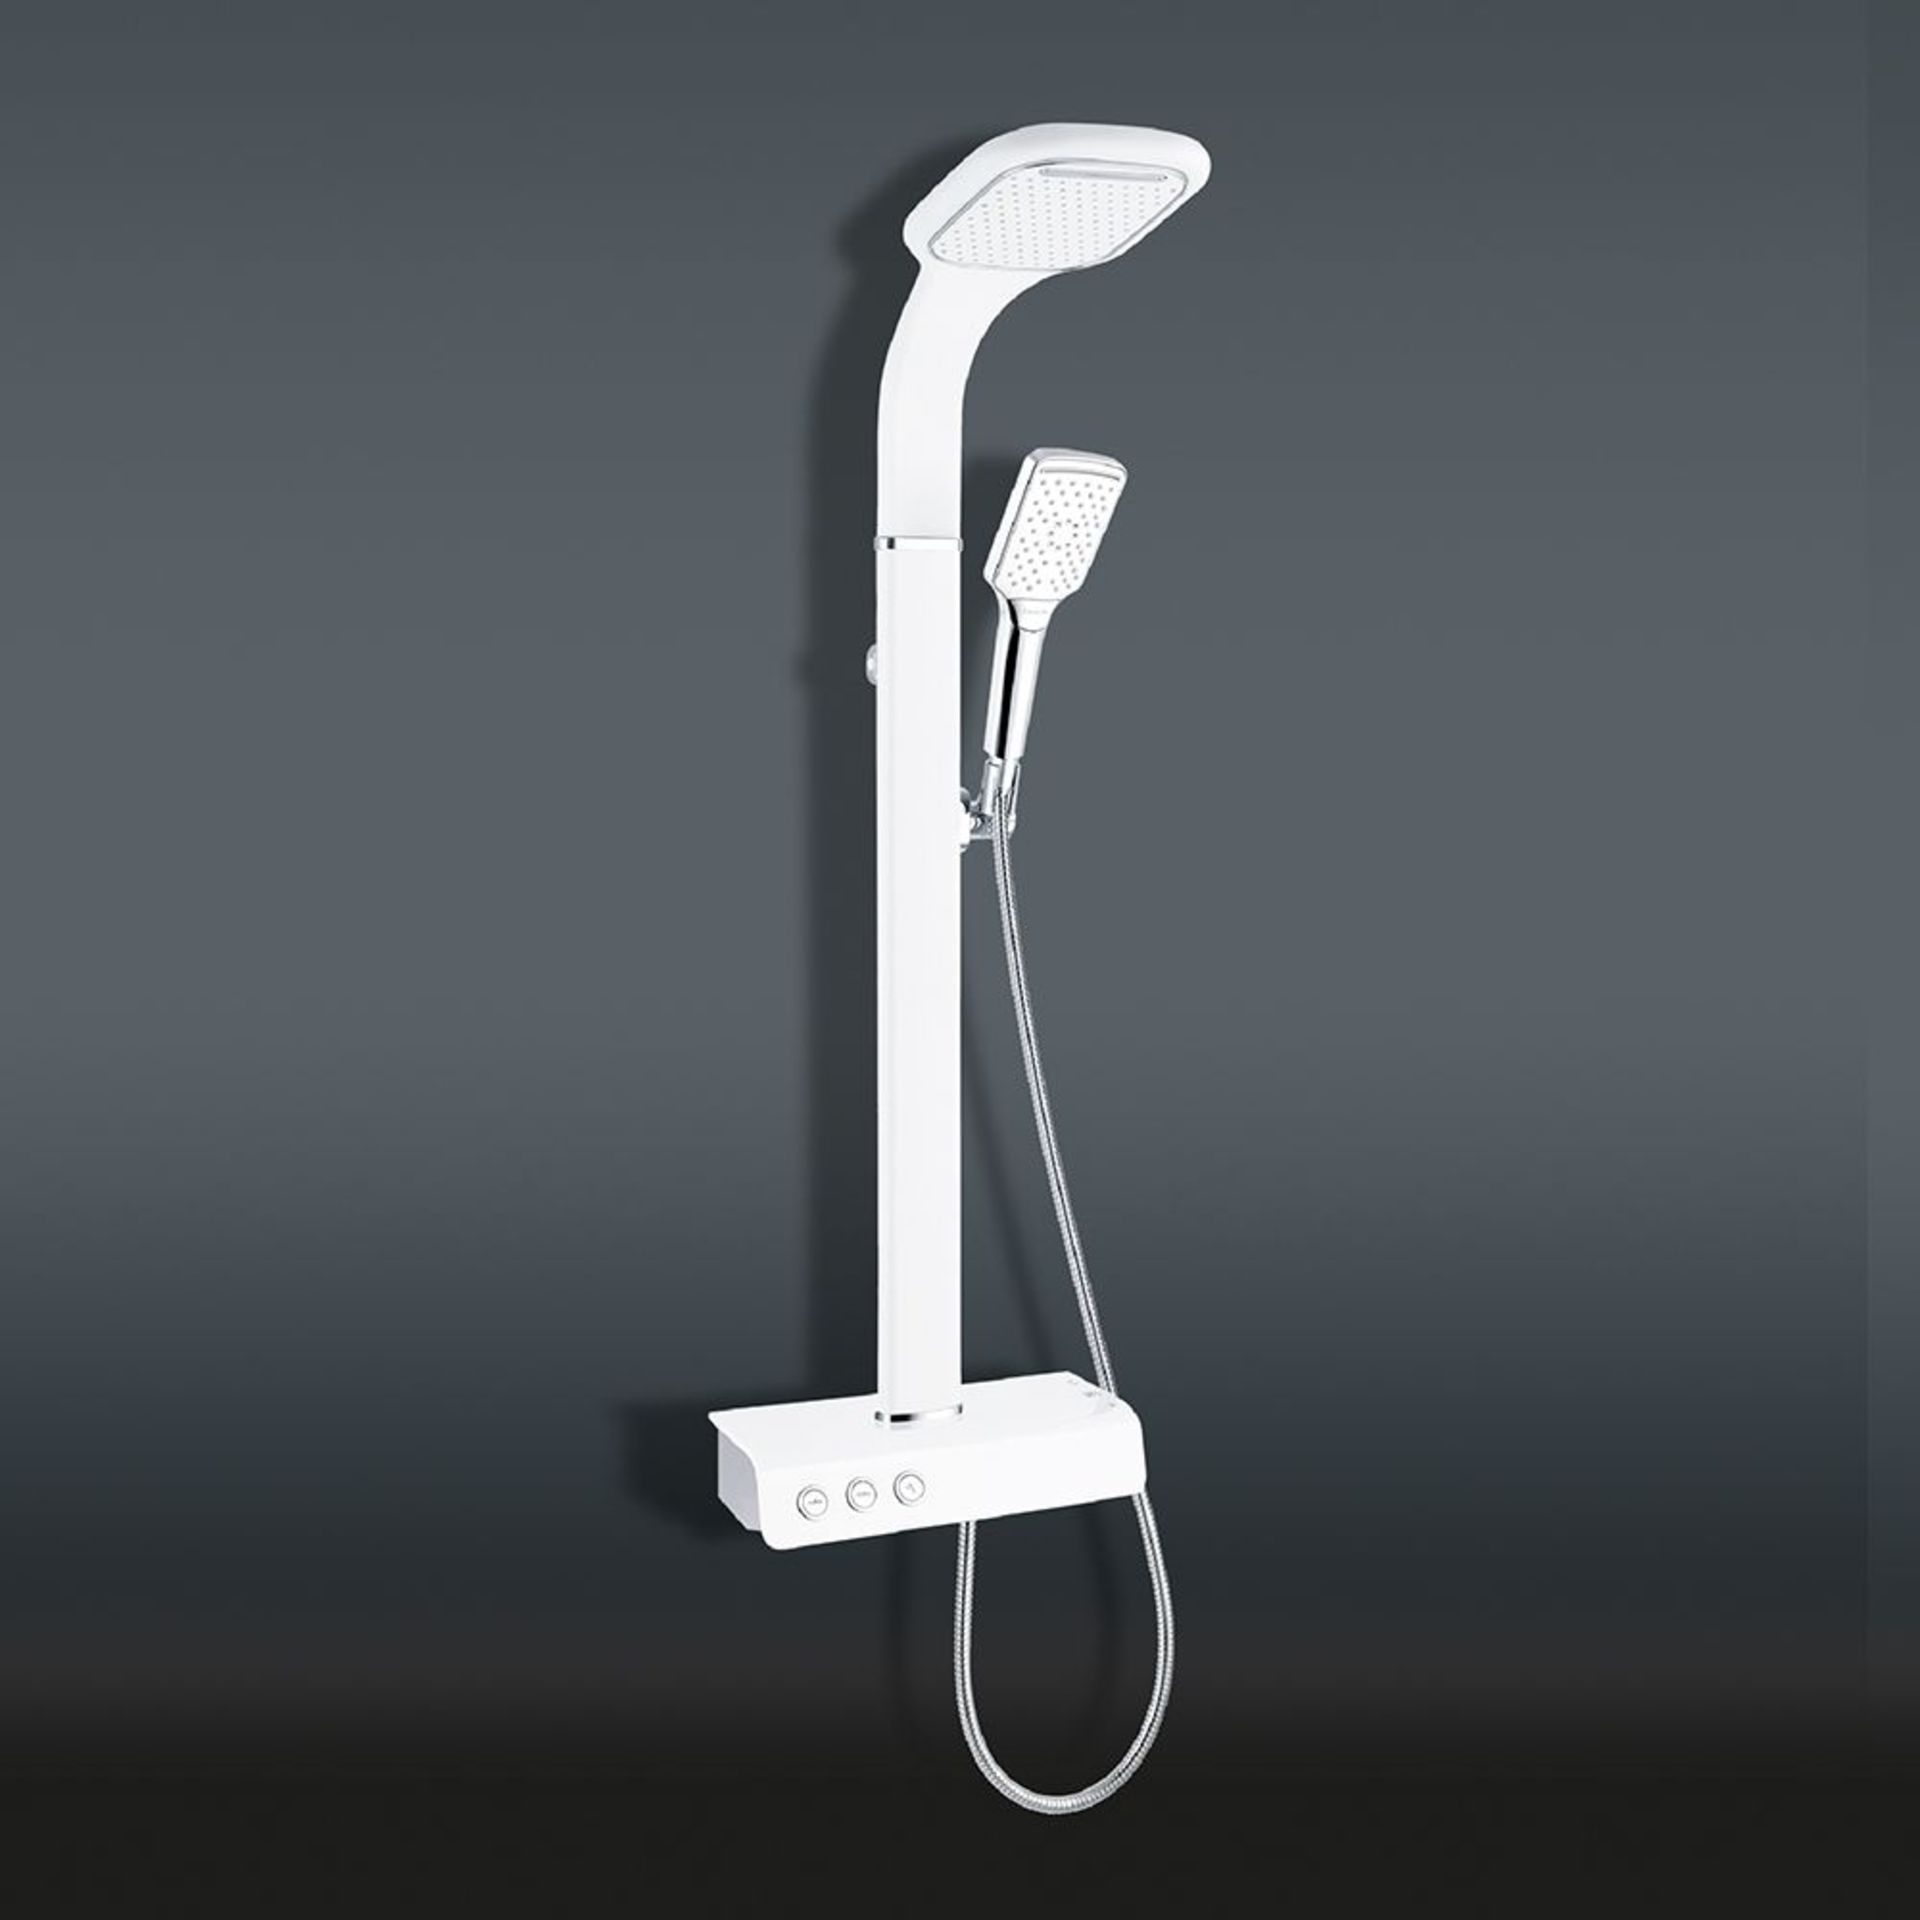 1 x Synergy Nubian White Thermostatic Shower Panel Kit and Handset - New Boxed Stock - RRP £549!